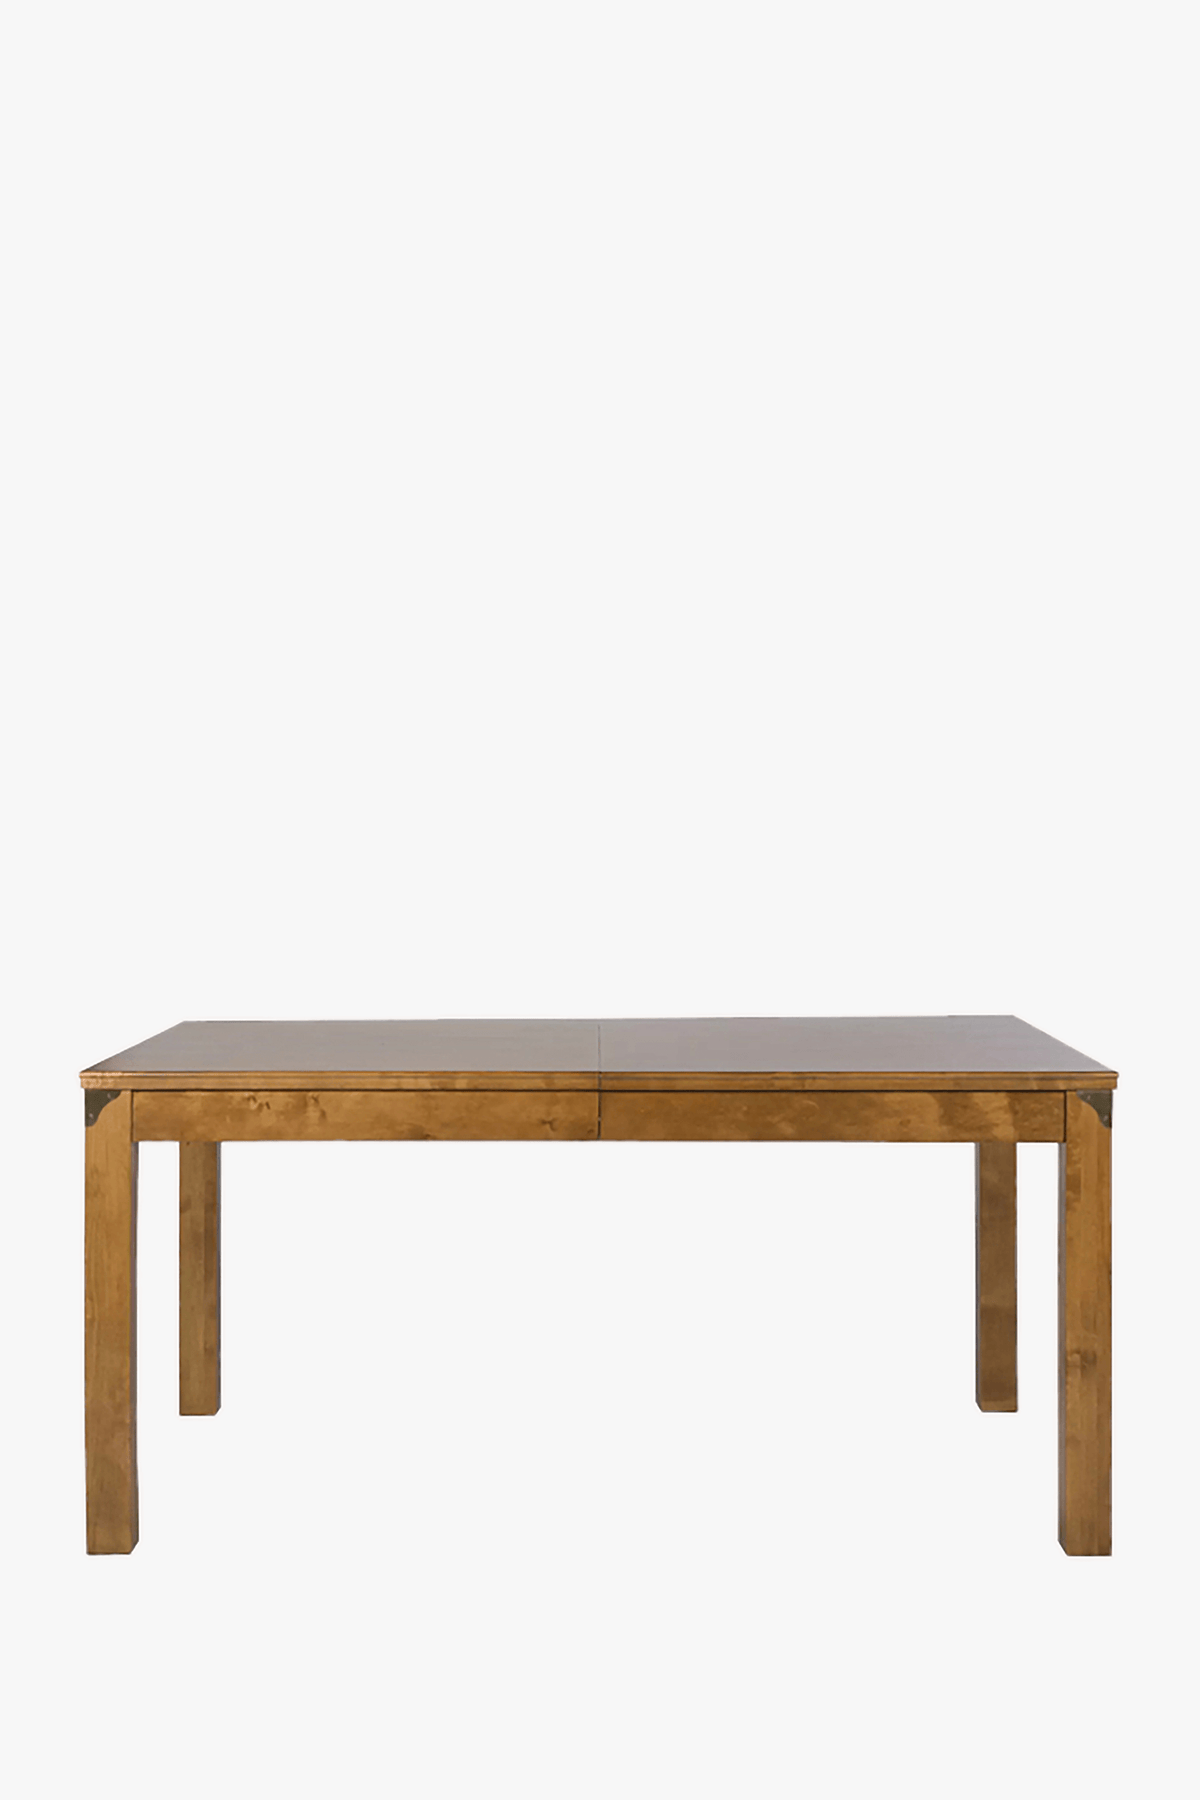 Balmoral Extending Dining Table